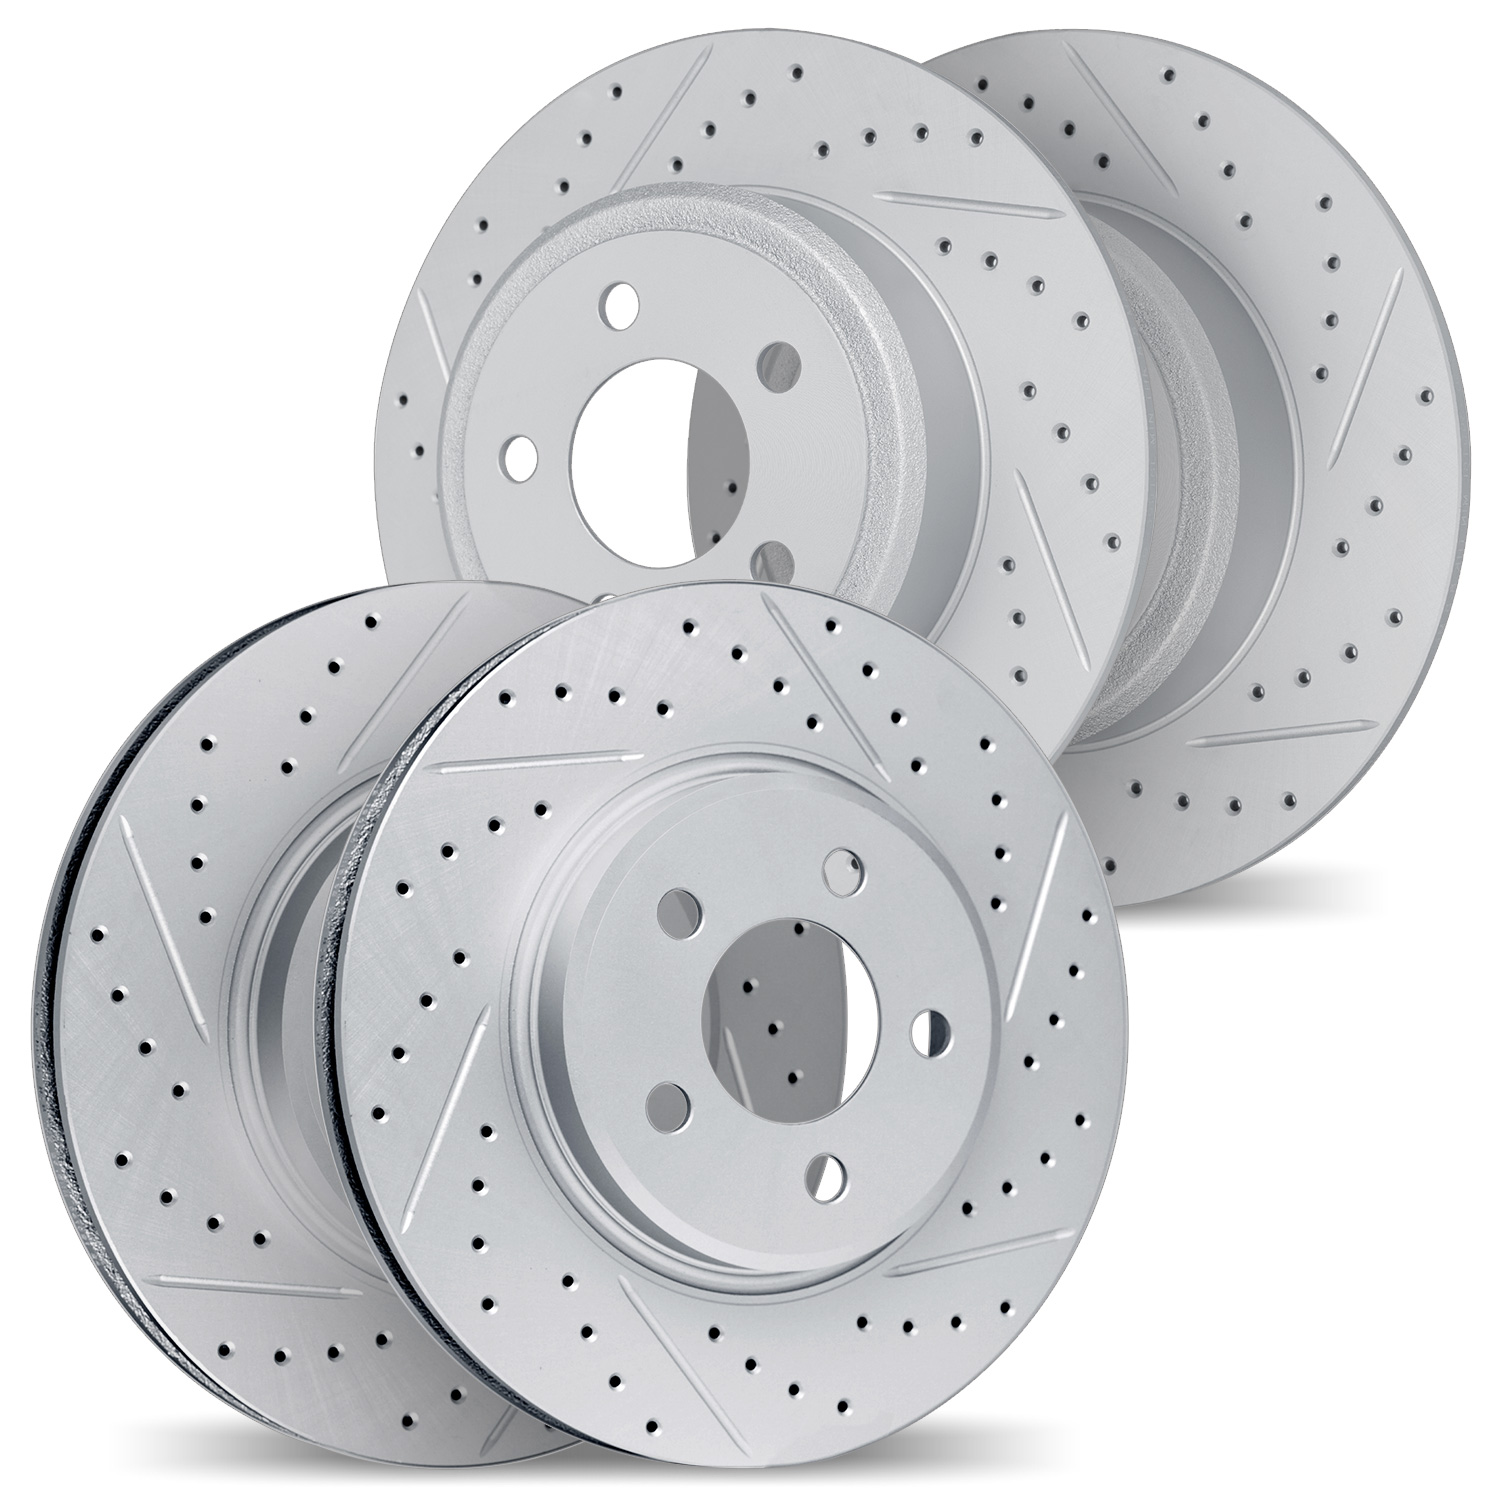 2004-76019 Geoperformance Drilled/Slotted Brake Rotors, 2000-2010 Multiple Makes/Models, Position: Front and Rear